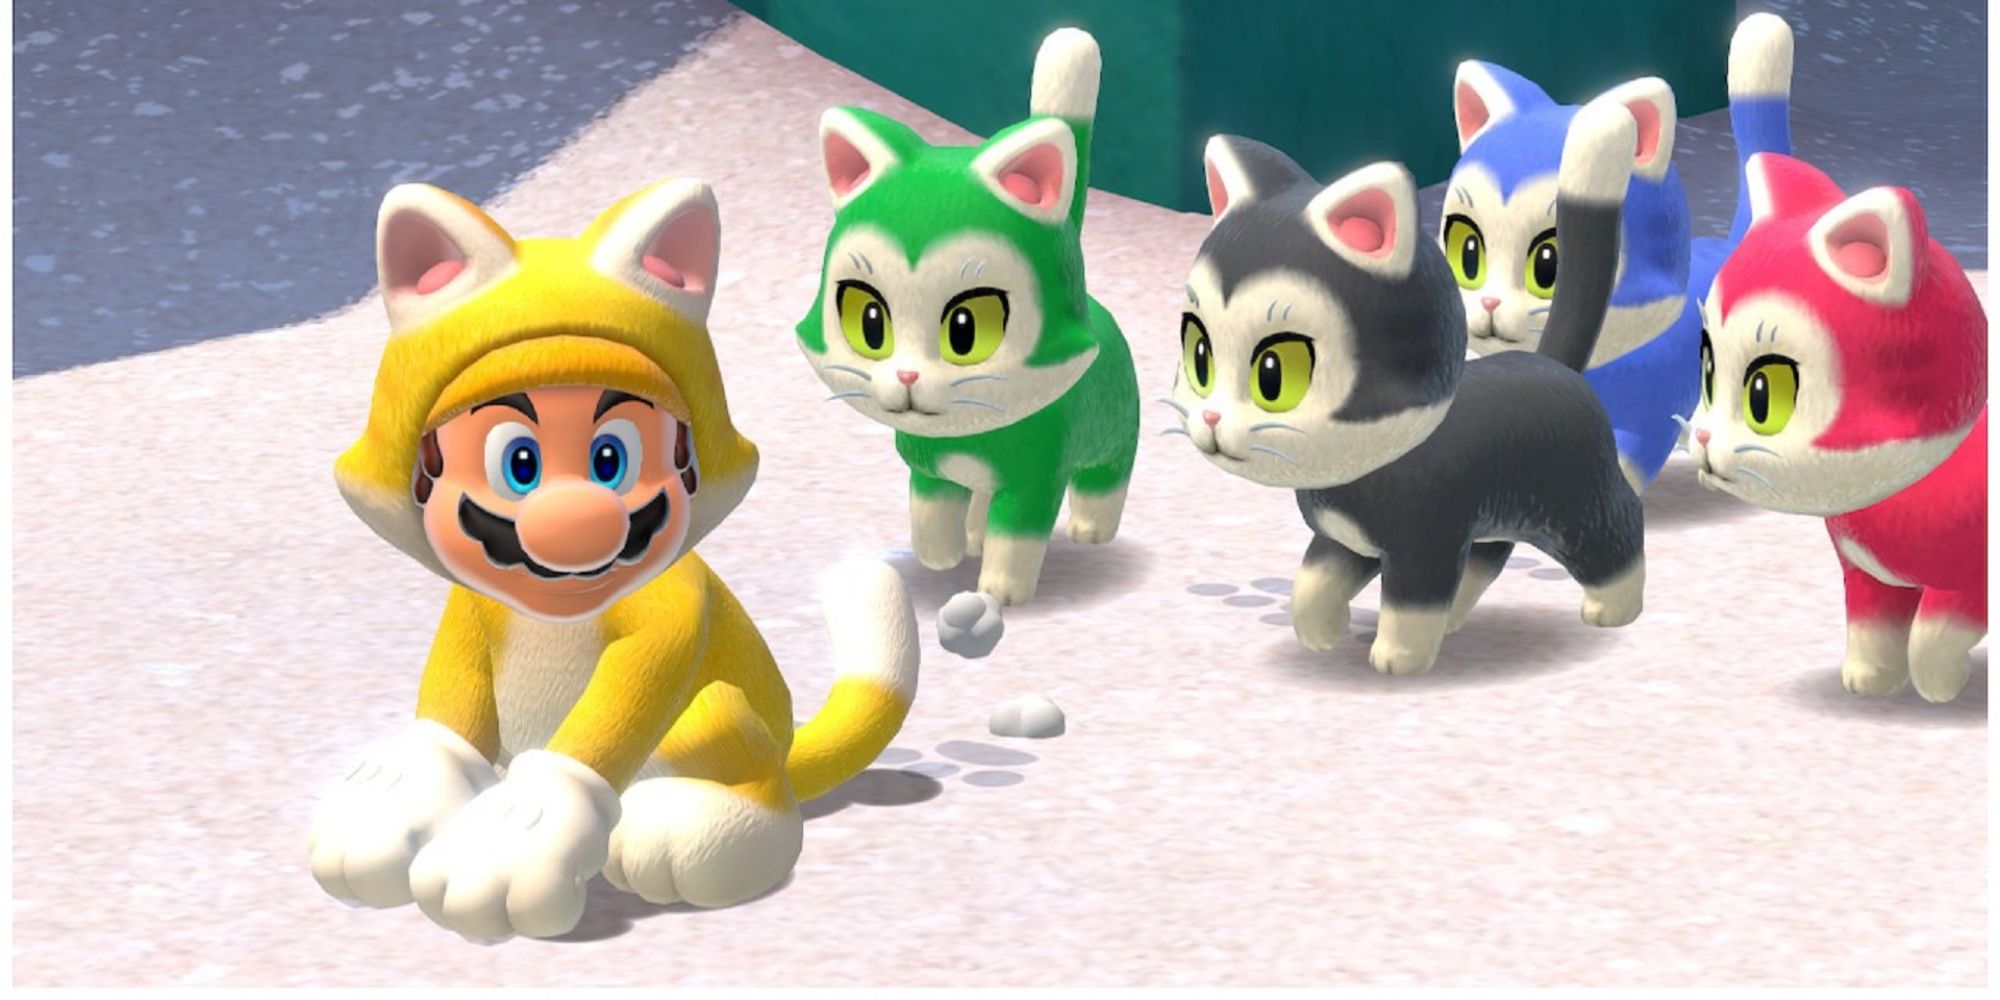 Cat Mario followed by colorful cats